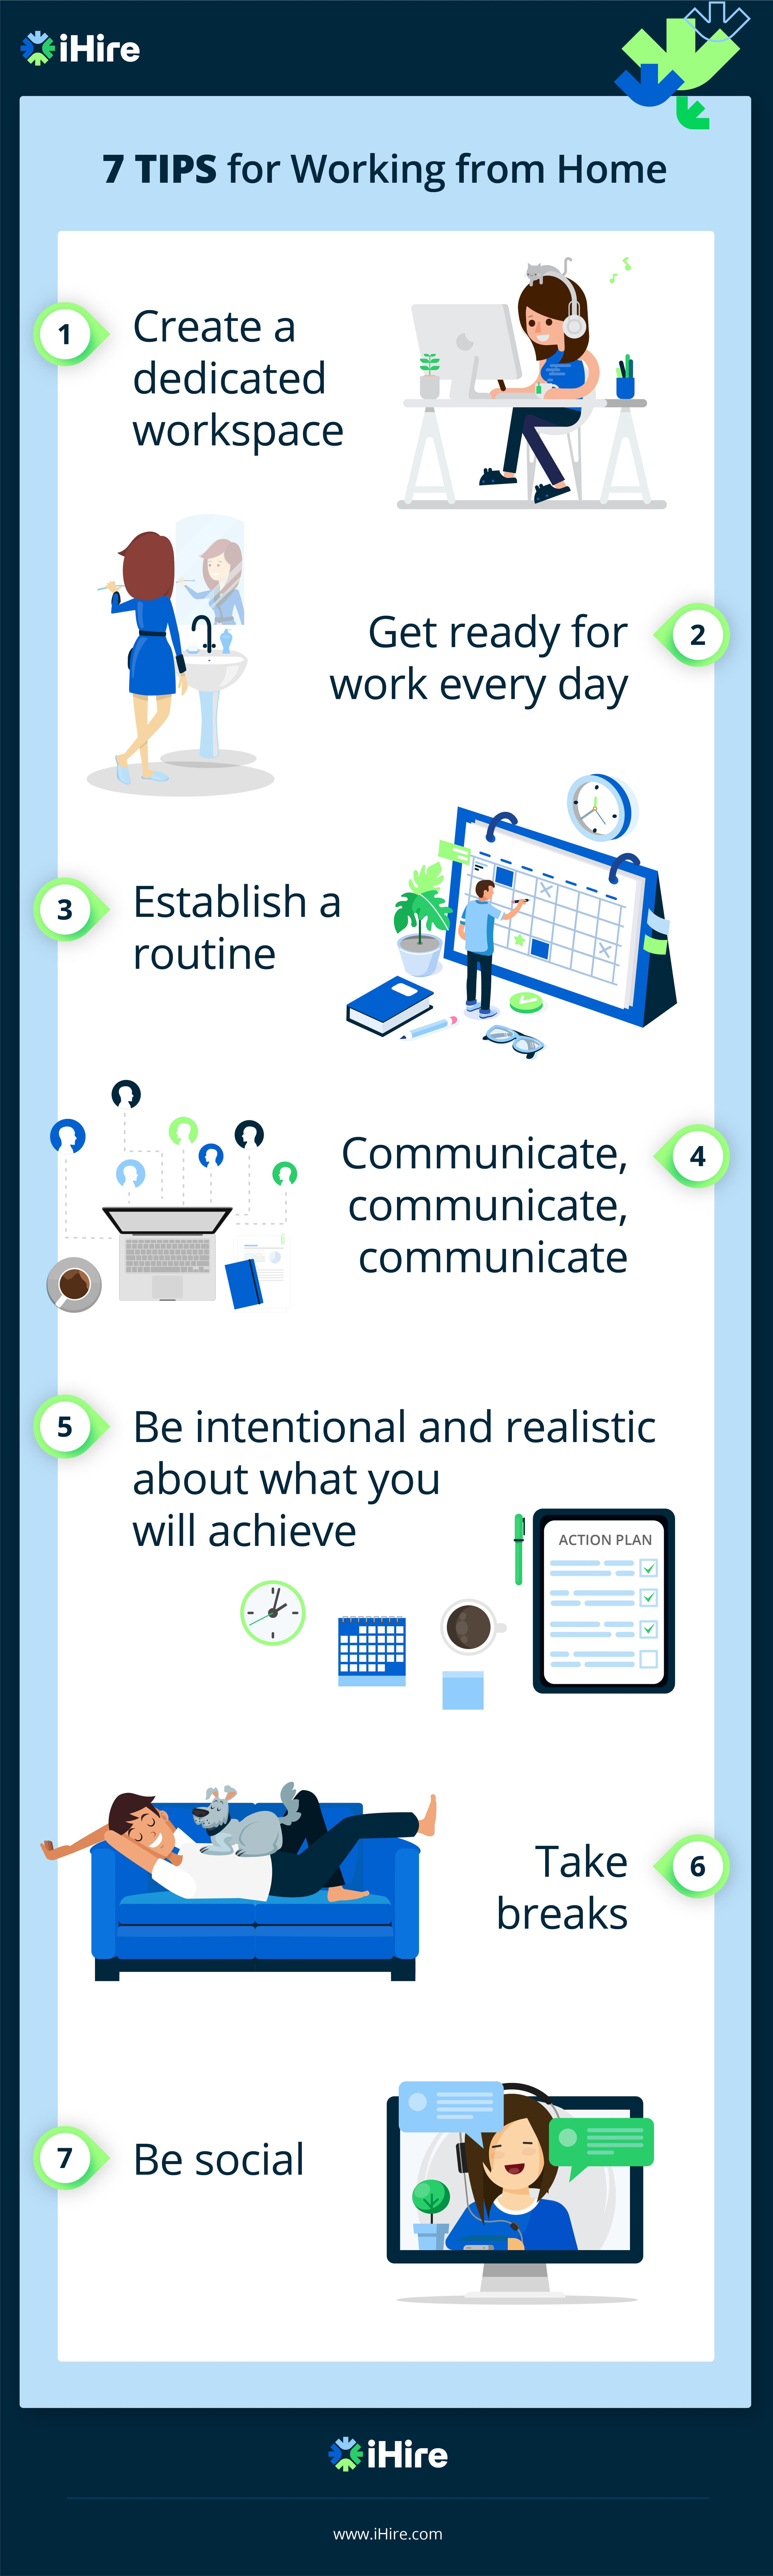 7 tips for working from home productively infographic ihire